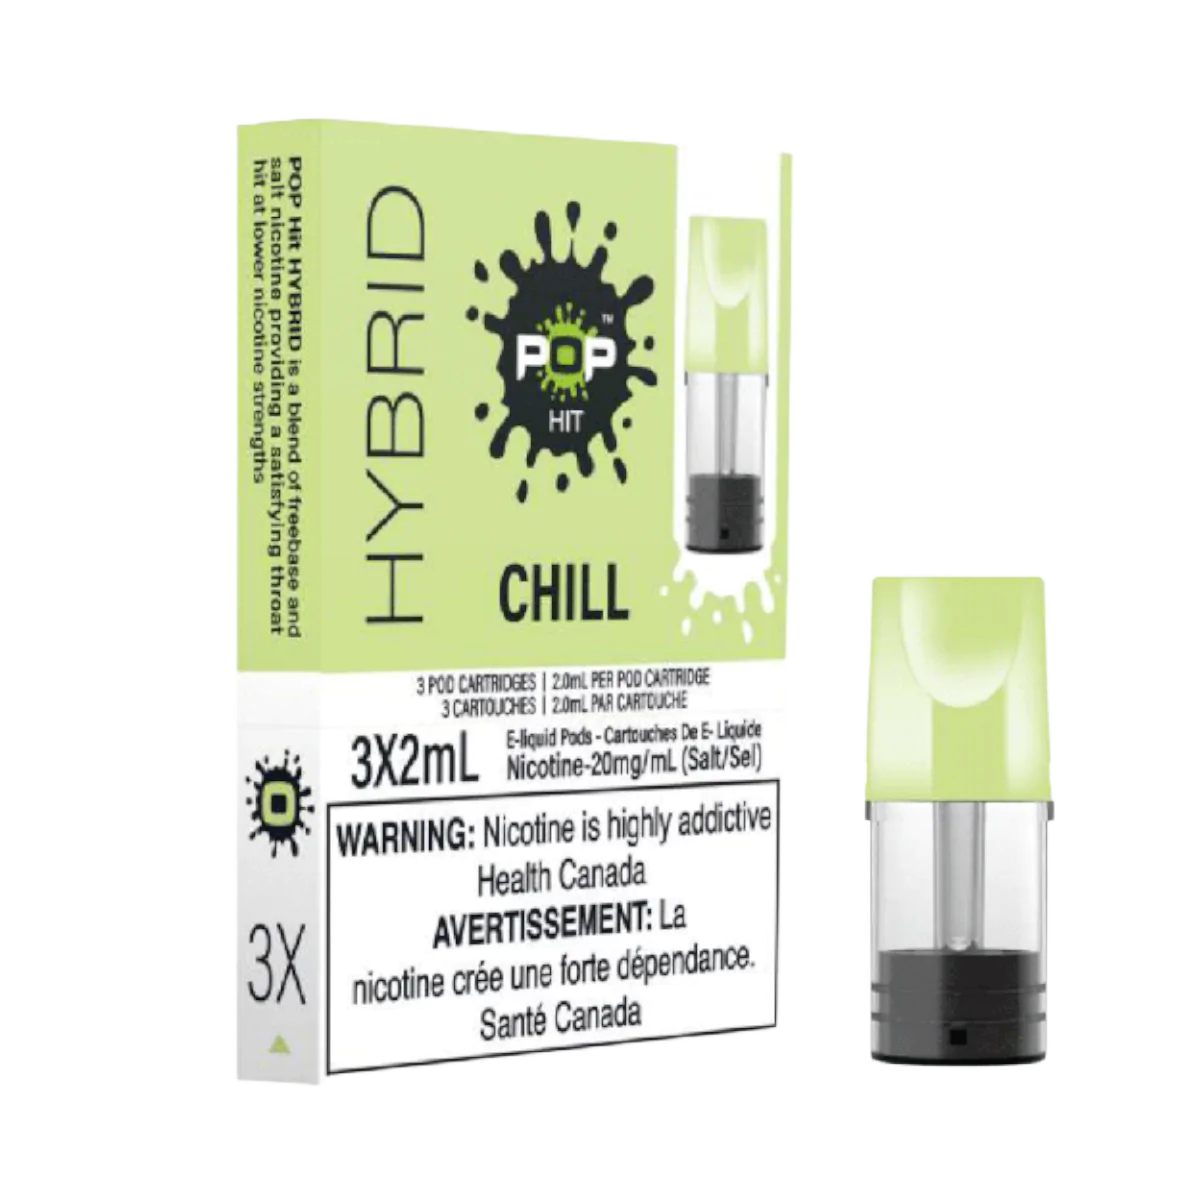 Chill - Pop Hit Hybrid - 20mg - 5pc/Carton - EXCISED